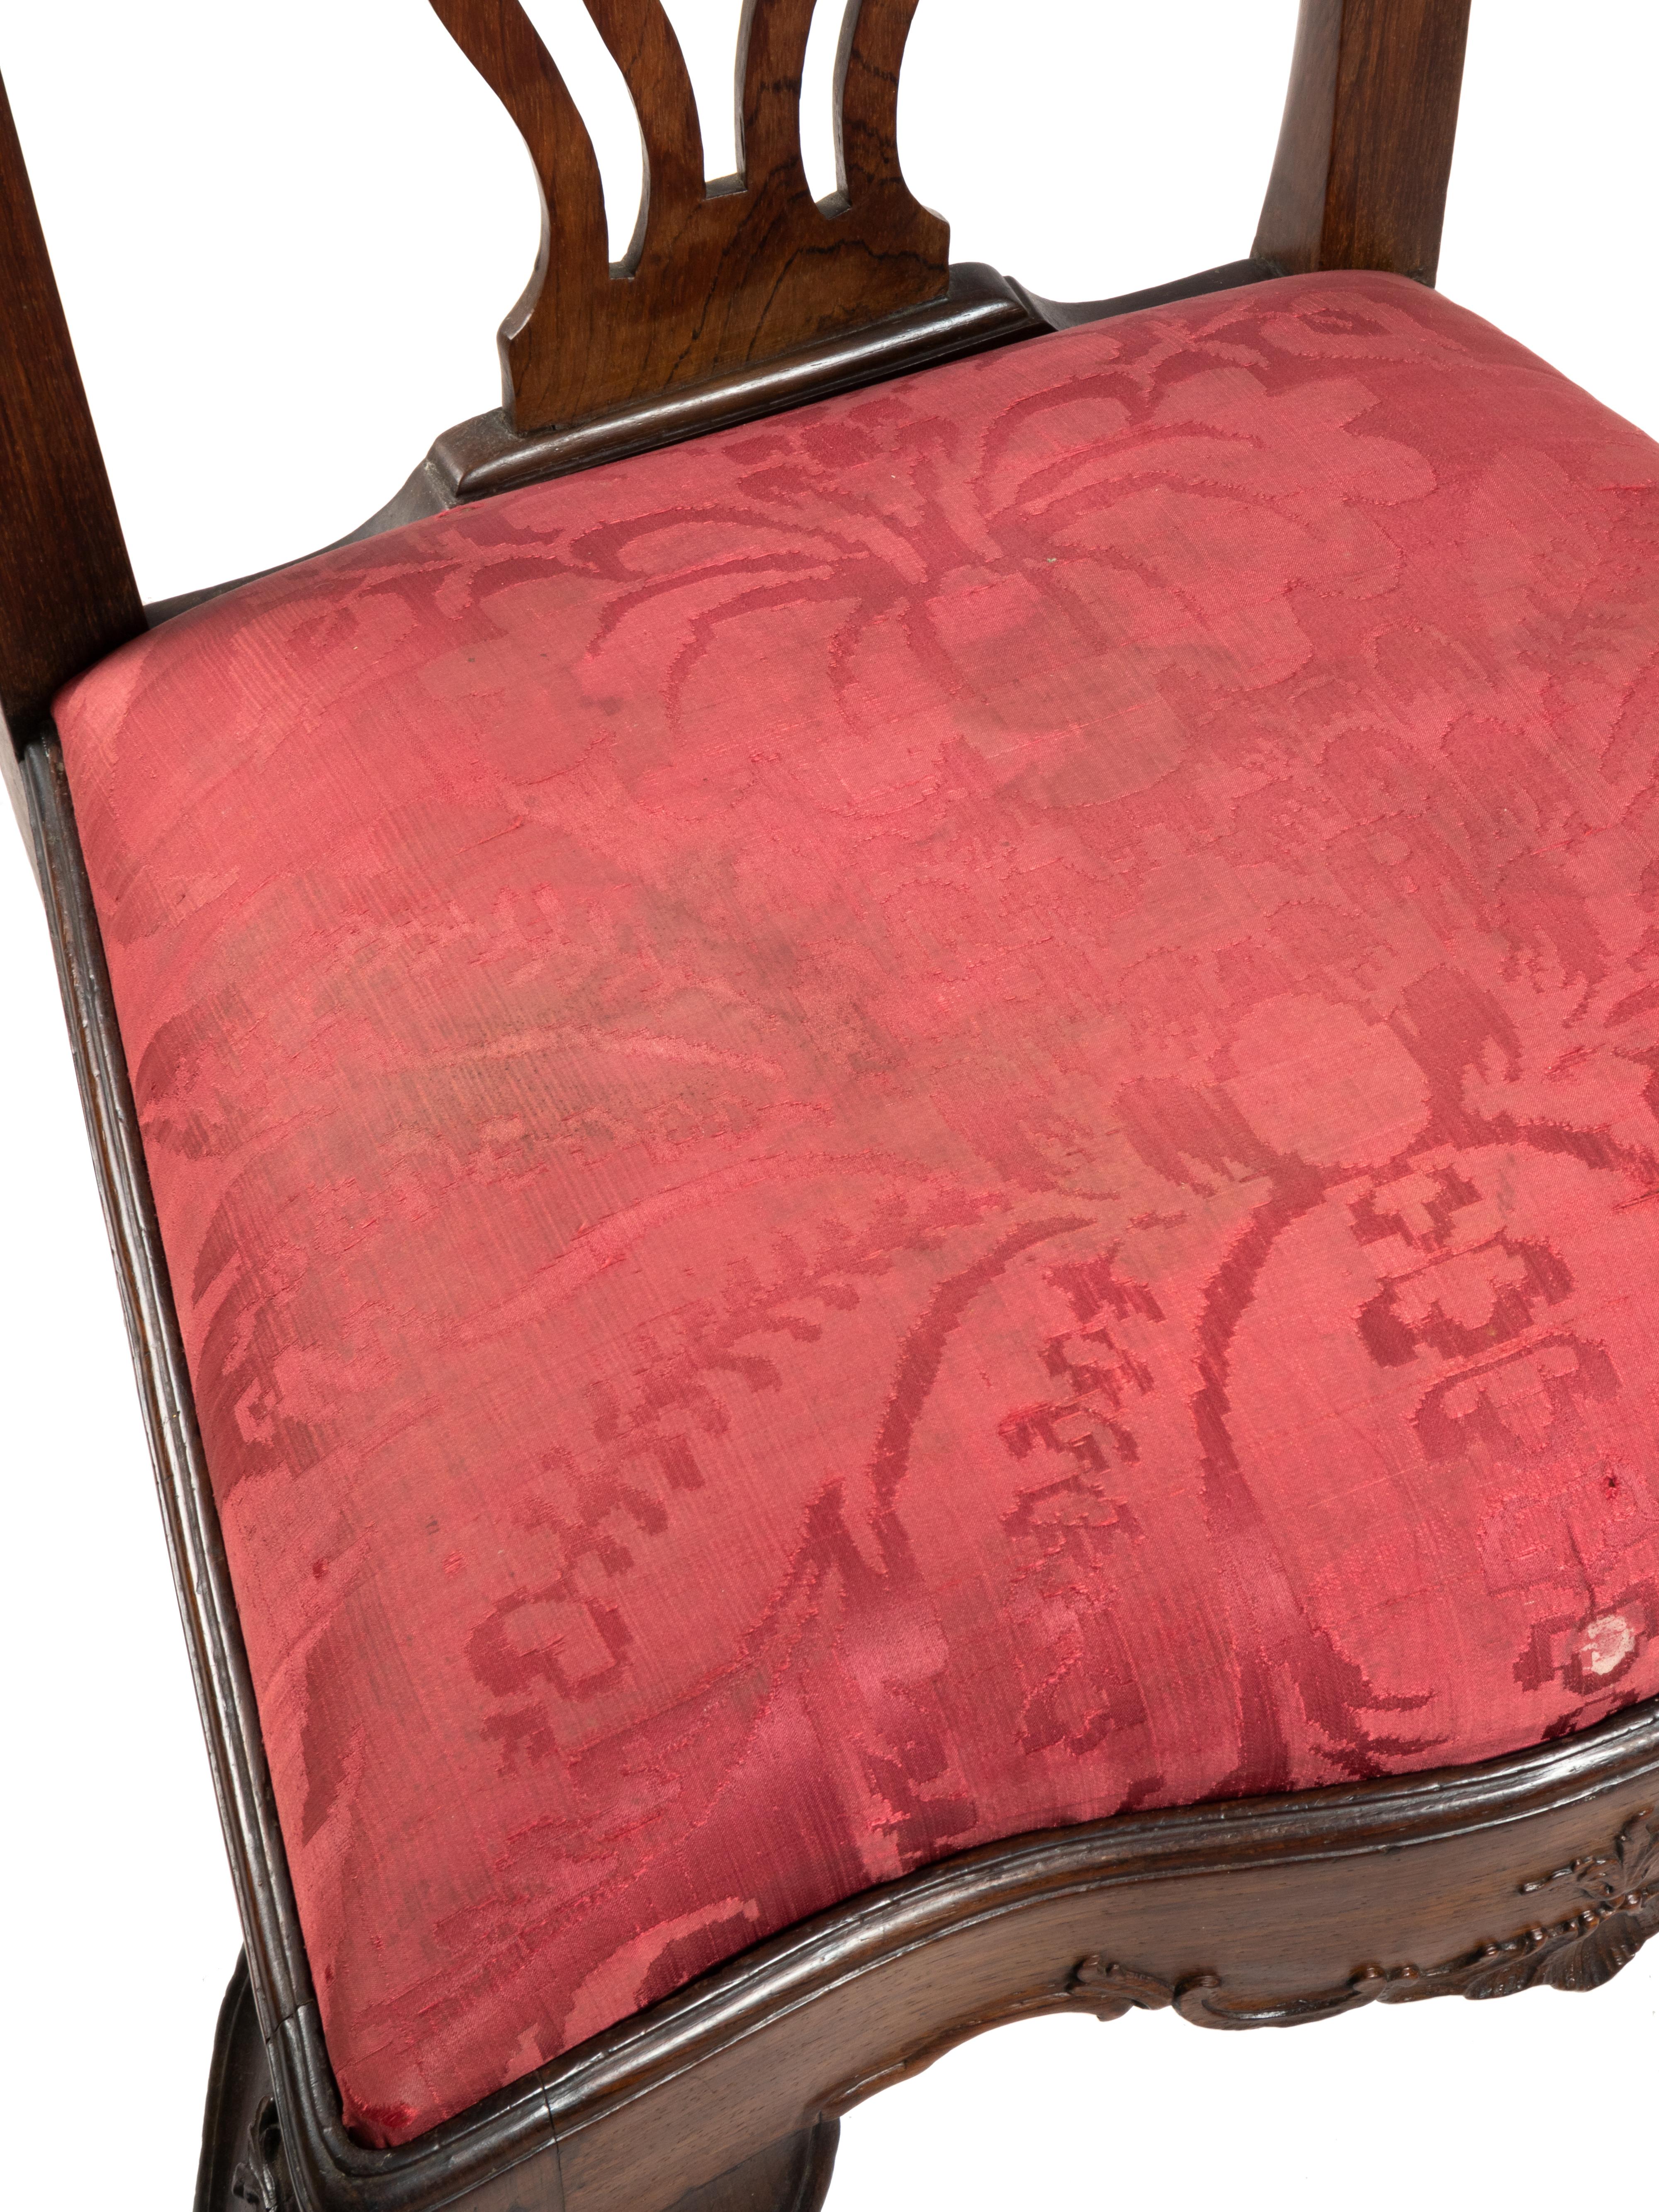 Baroque Red Damask Portuguese Chair, 18th Century For Sale 3